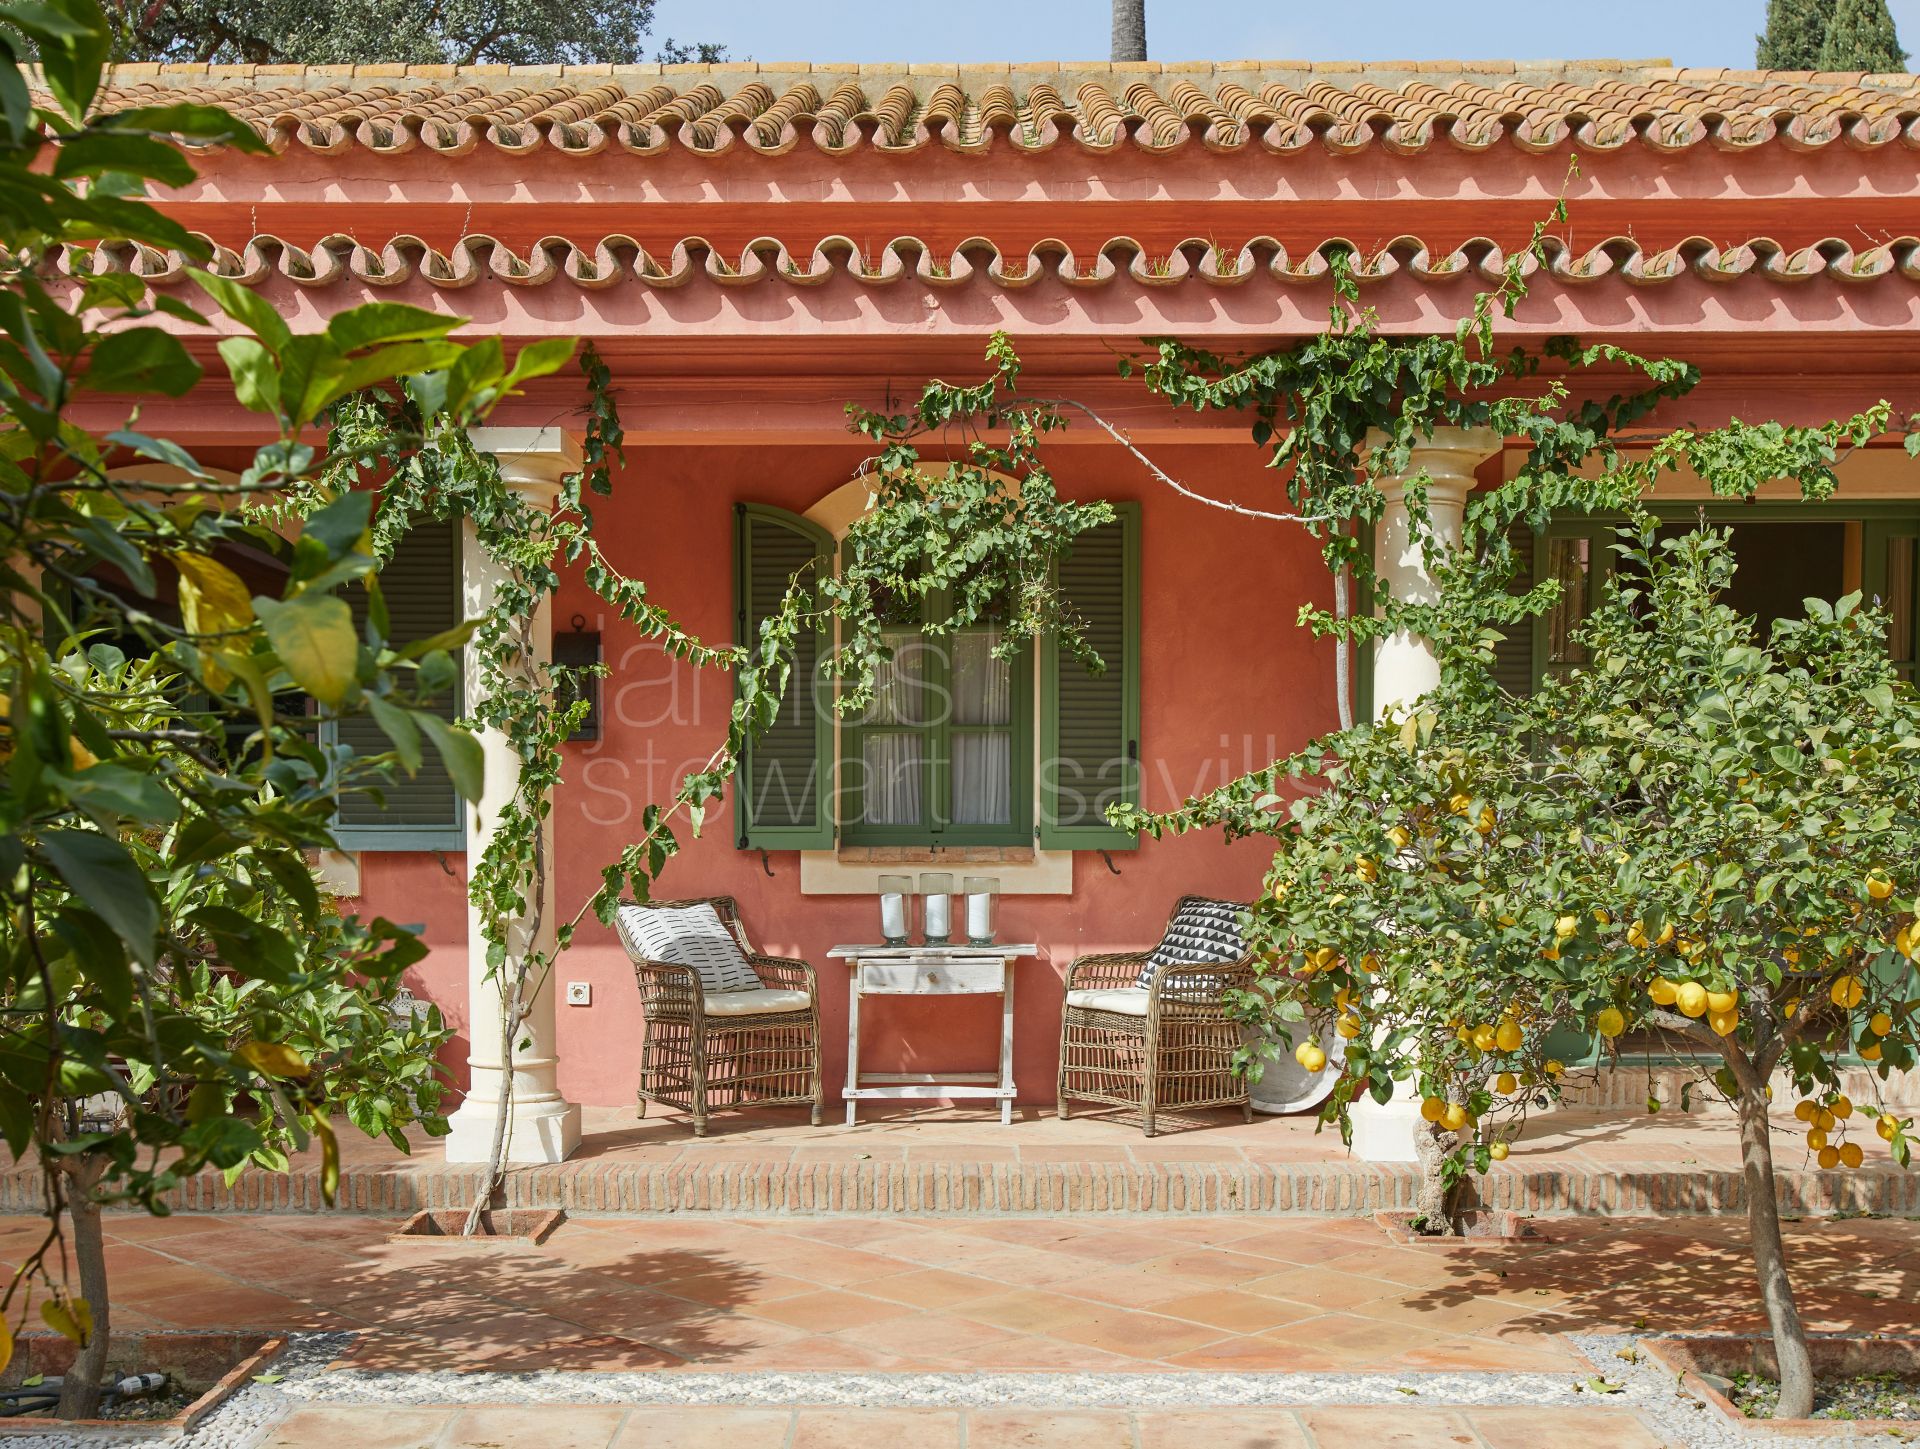 Superb one storey villa in Central Sotogrande - Andalucian architecture at its best